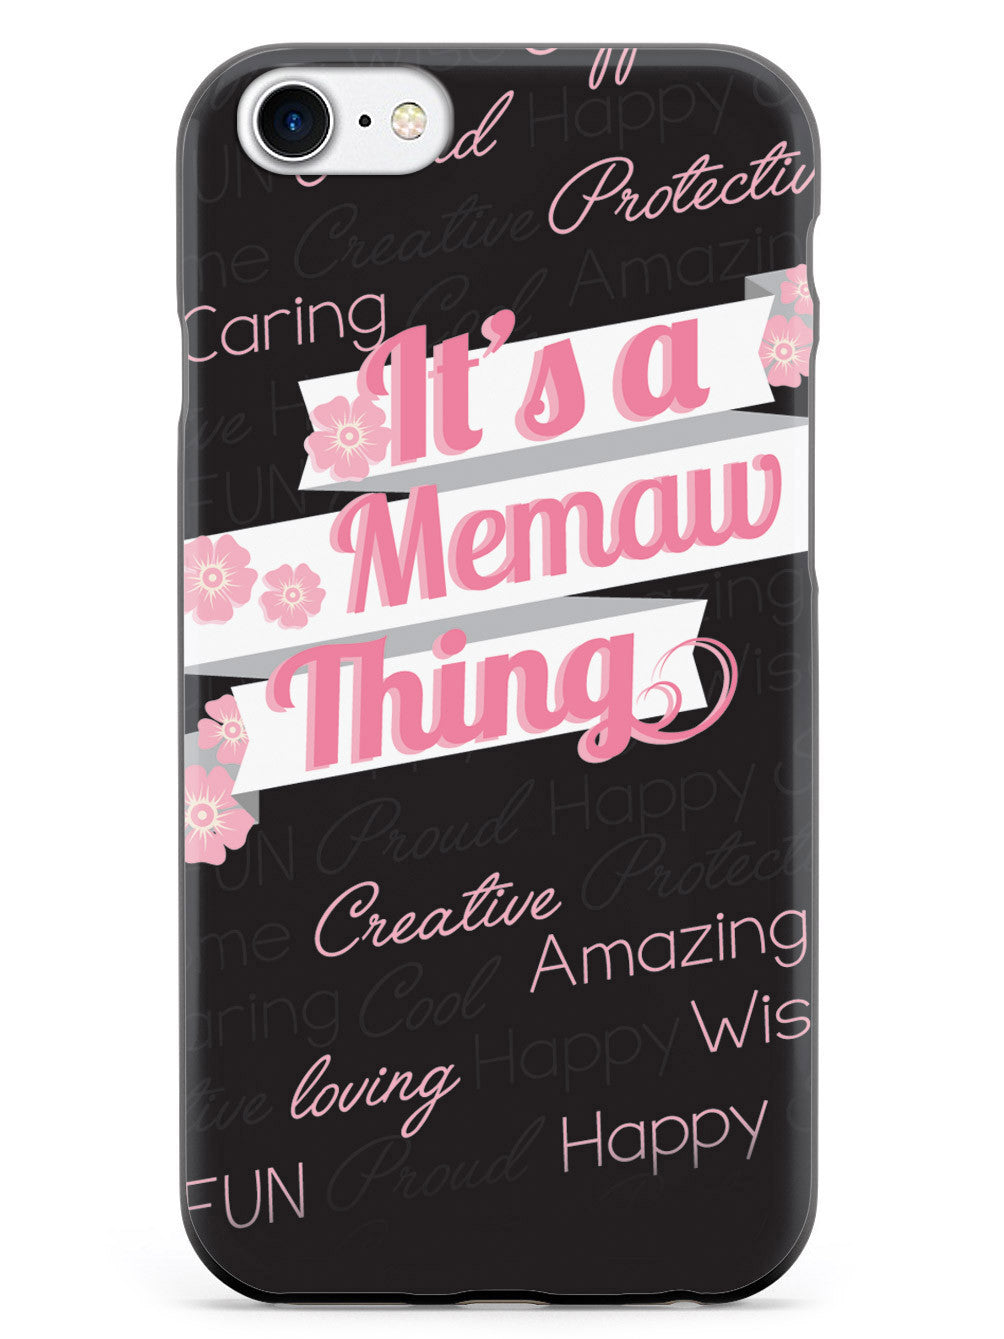 It's a Memaw Thing (Pink) Case